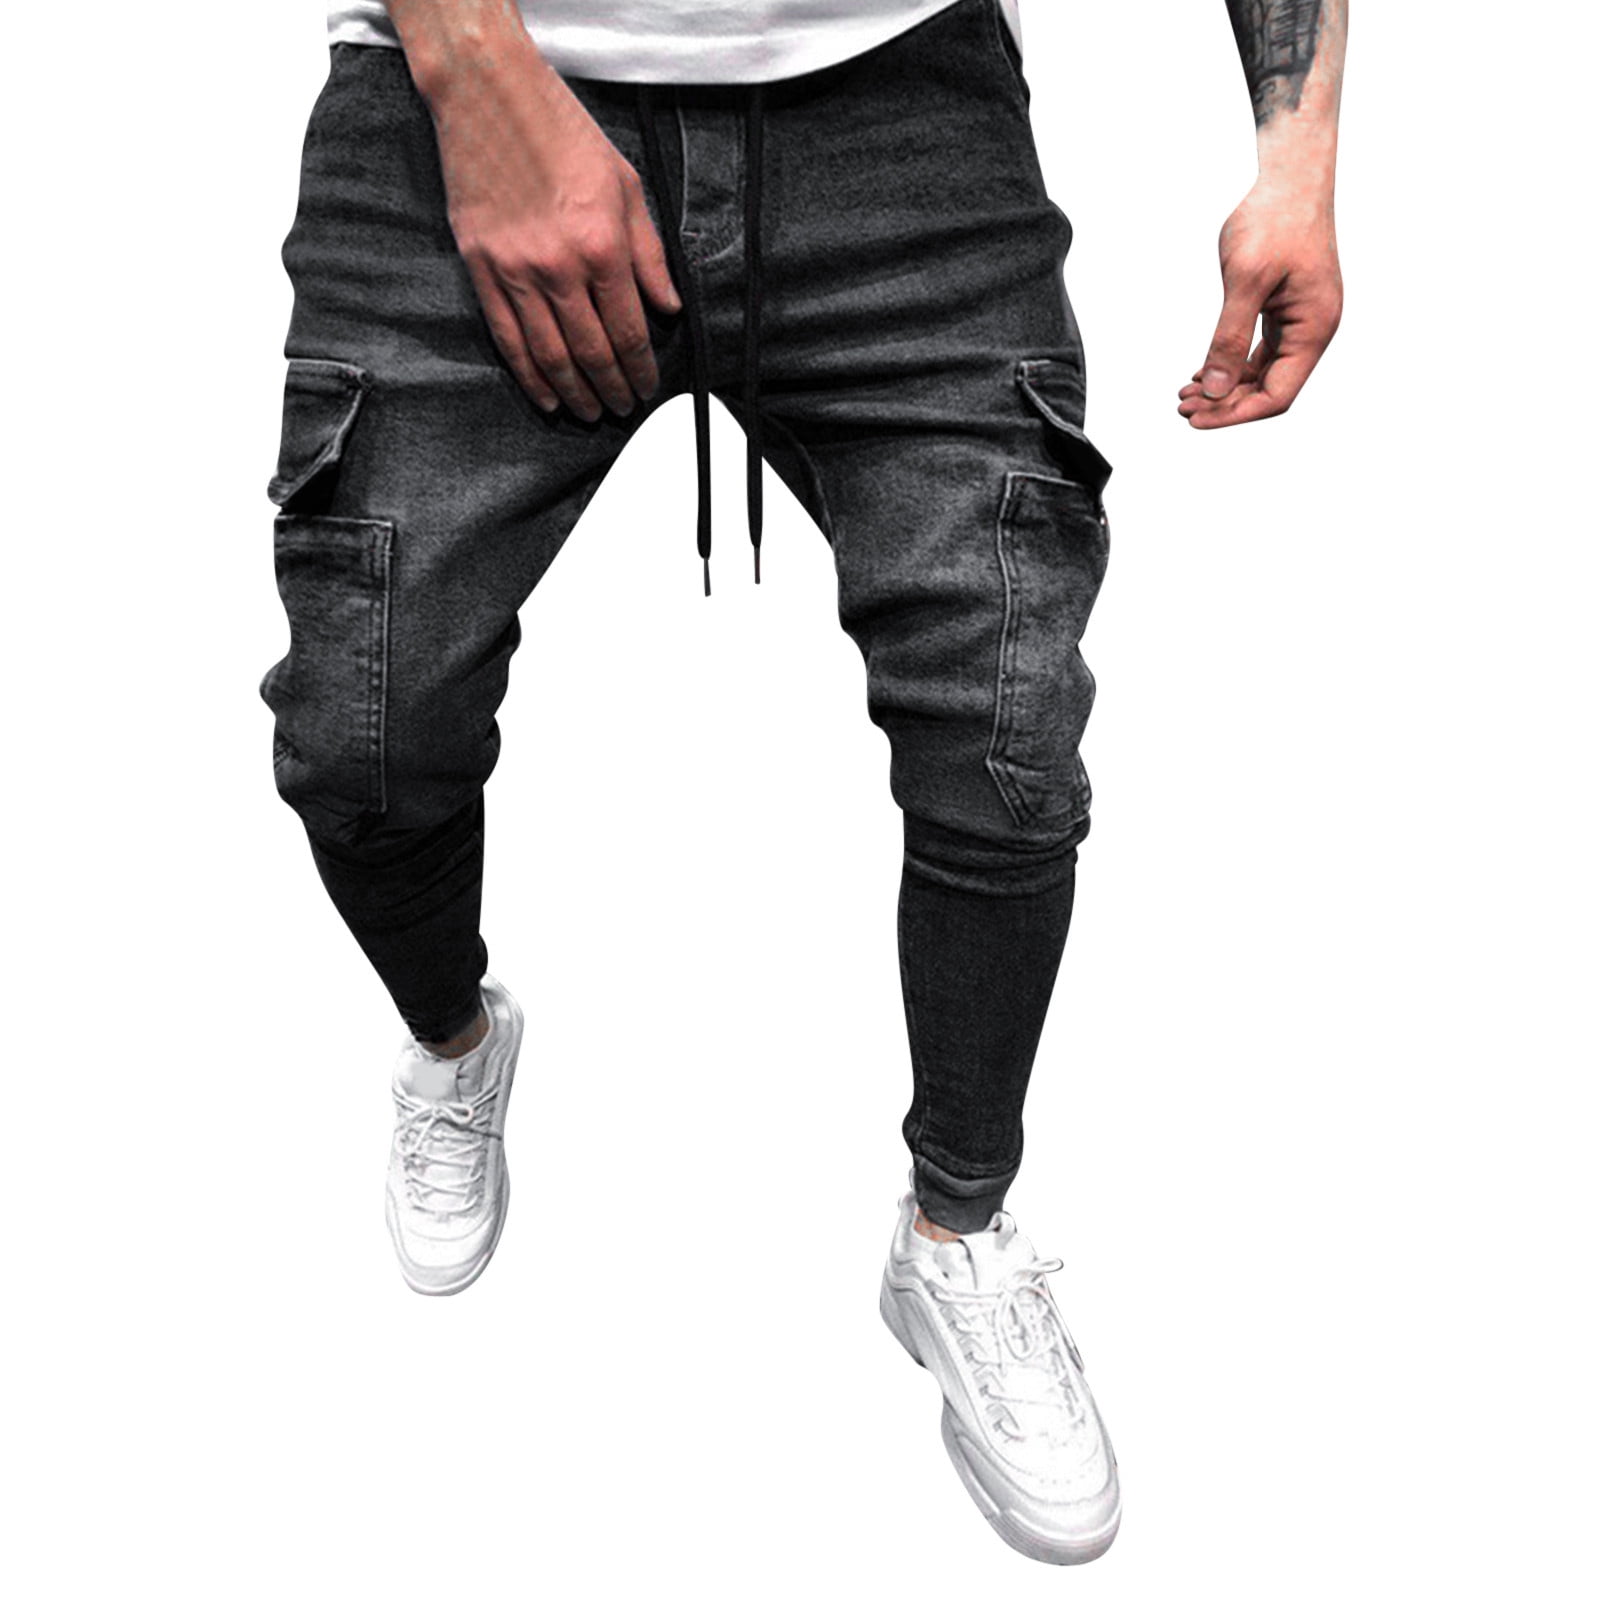 gvdentm Mens Jeans Relaxed Fit Men's Skinny Jeans Stretch Washed Slim ...